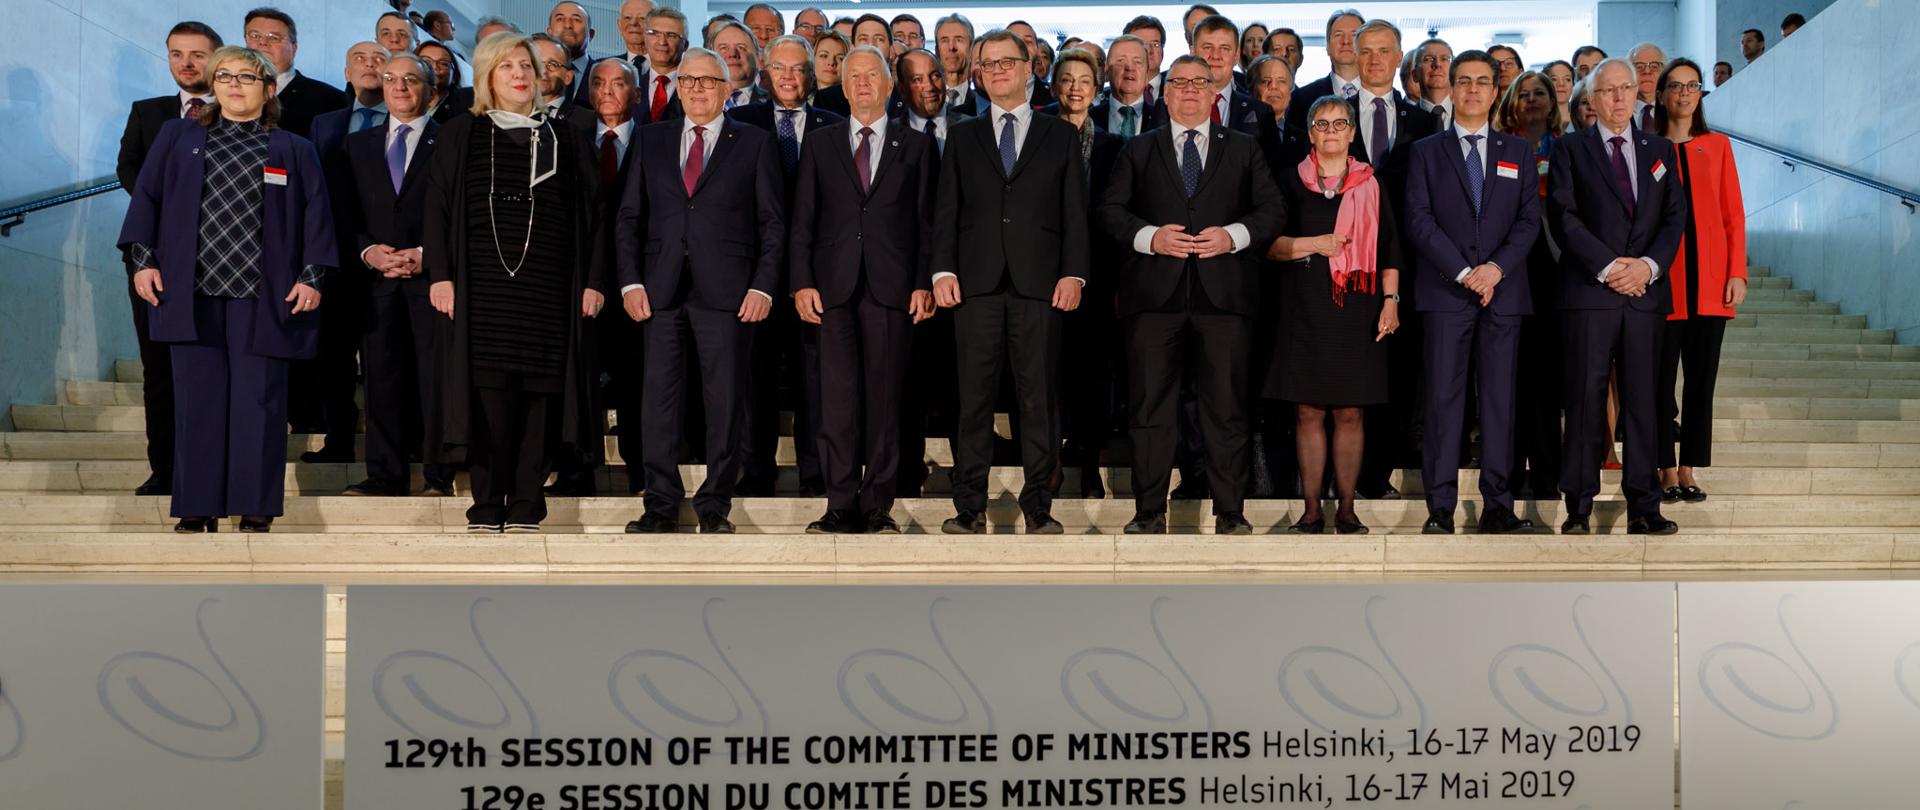 129th Session of the Committee of Ministers